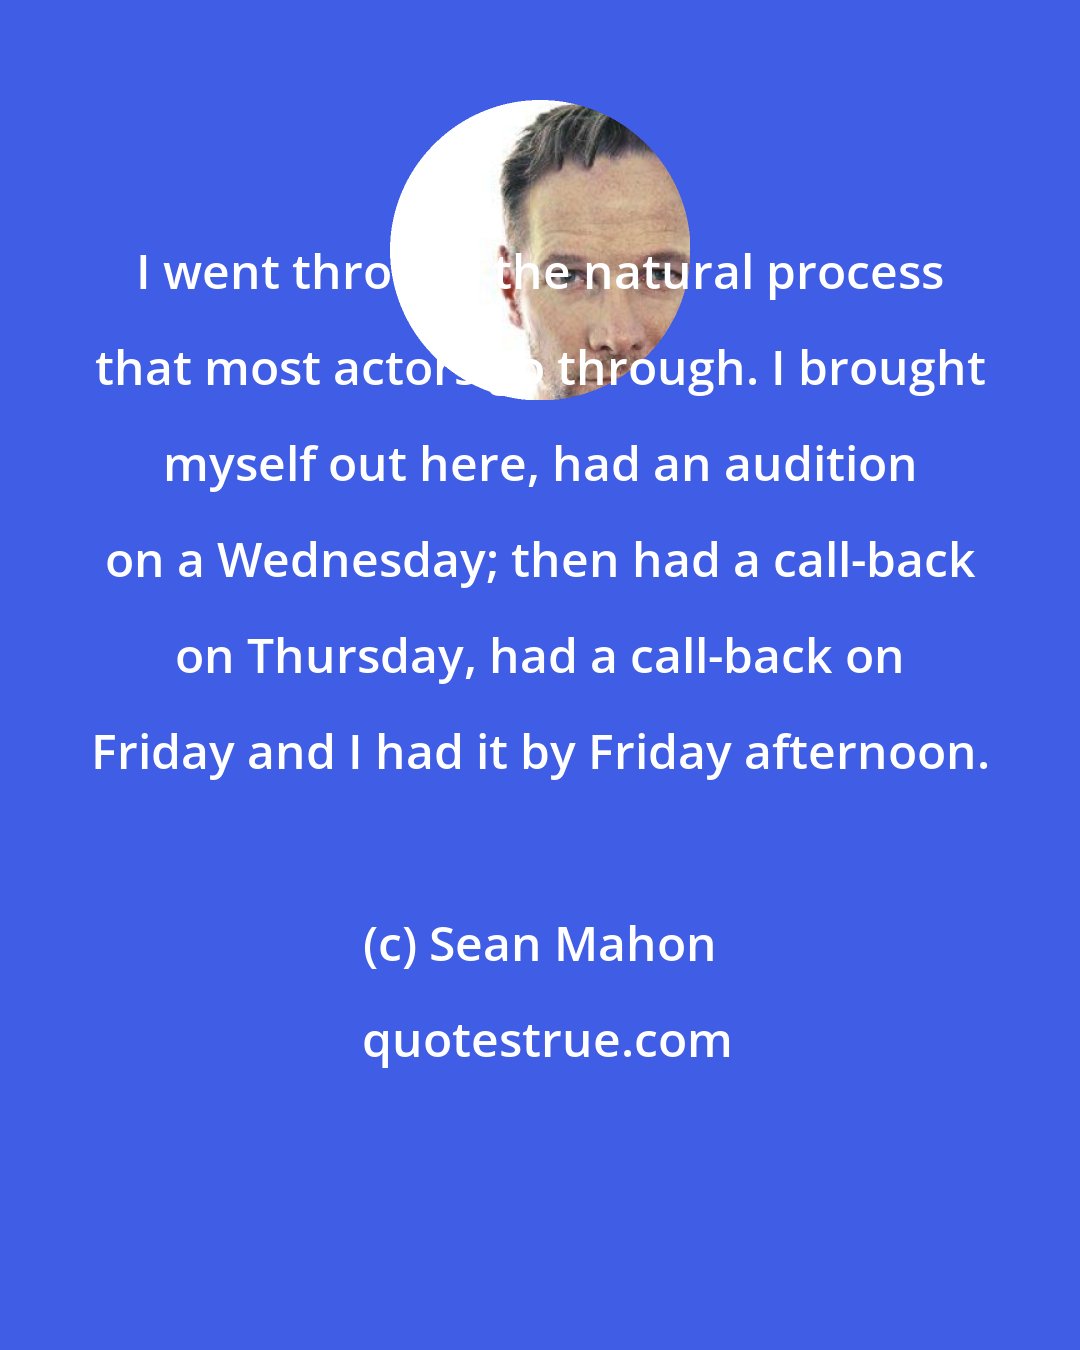 Sean Mahon: I went through the natural process that most actors go through. I brought myself out here, had an audition on a Wednesday; then had a call-back on Thursday, had a call-back on Friday and I had it by Friday afternoon.